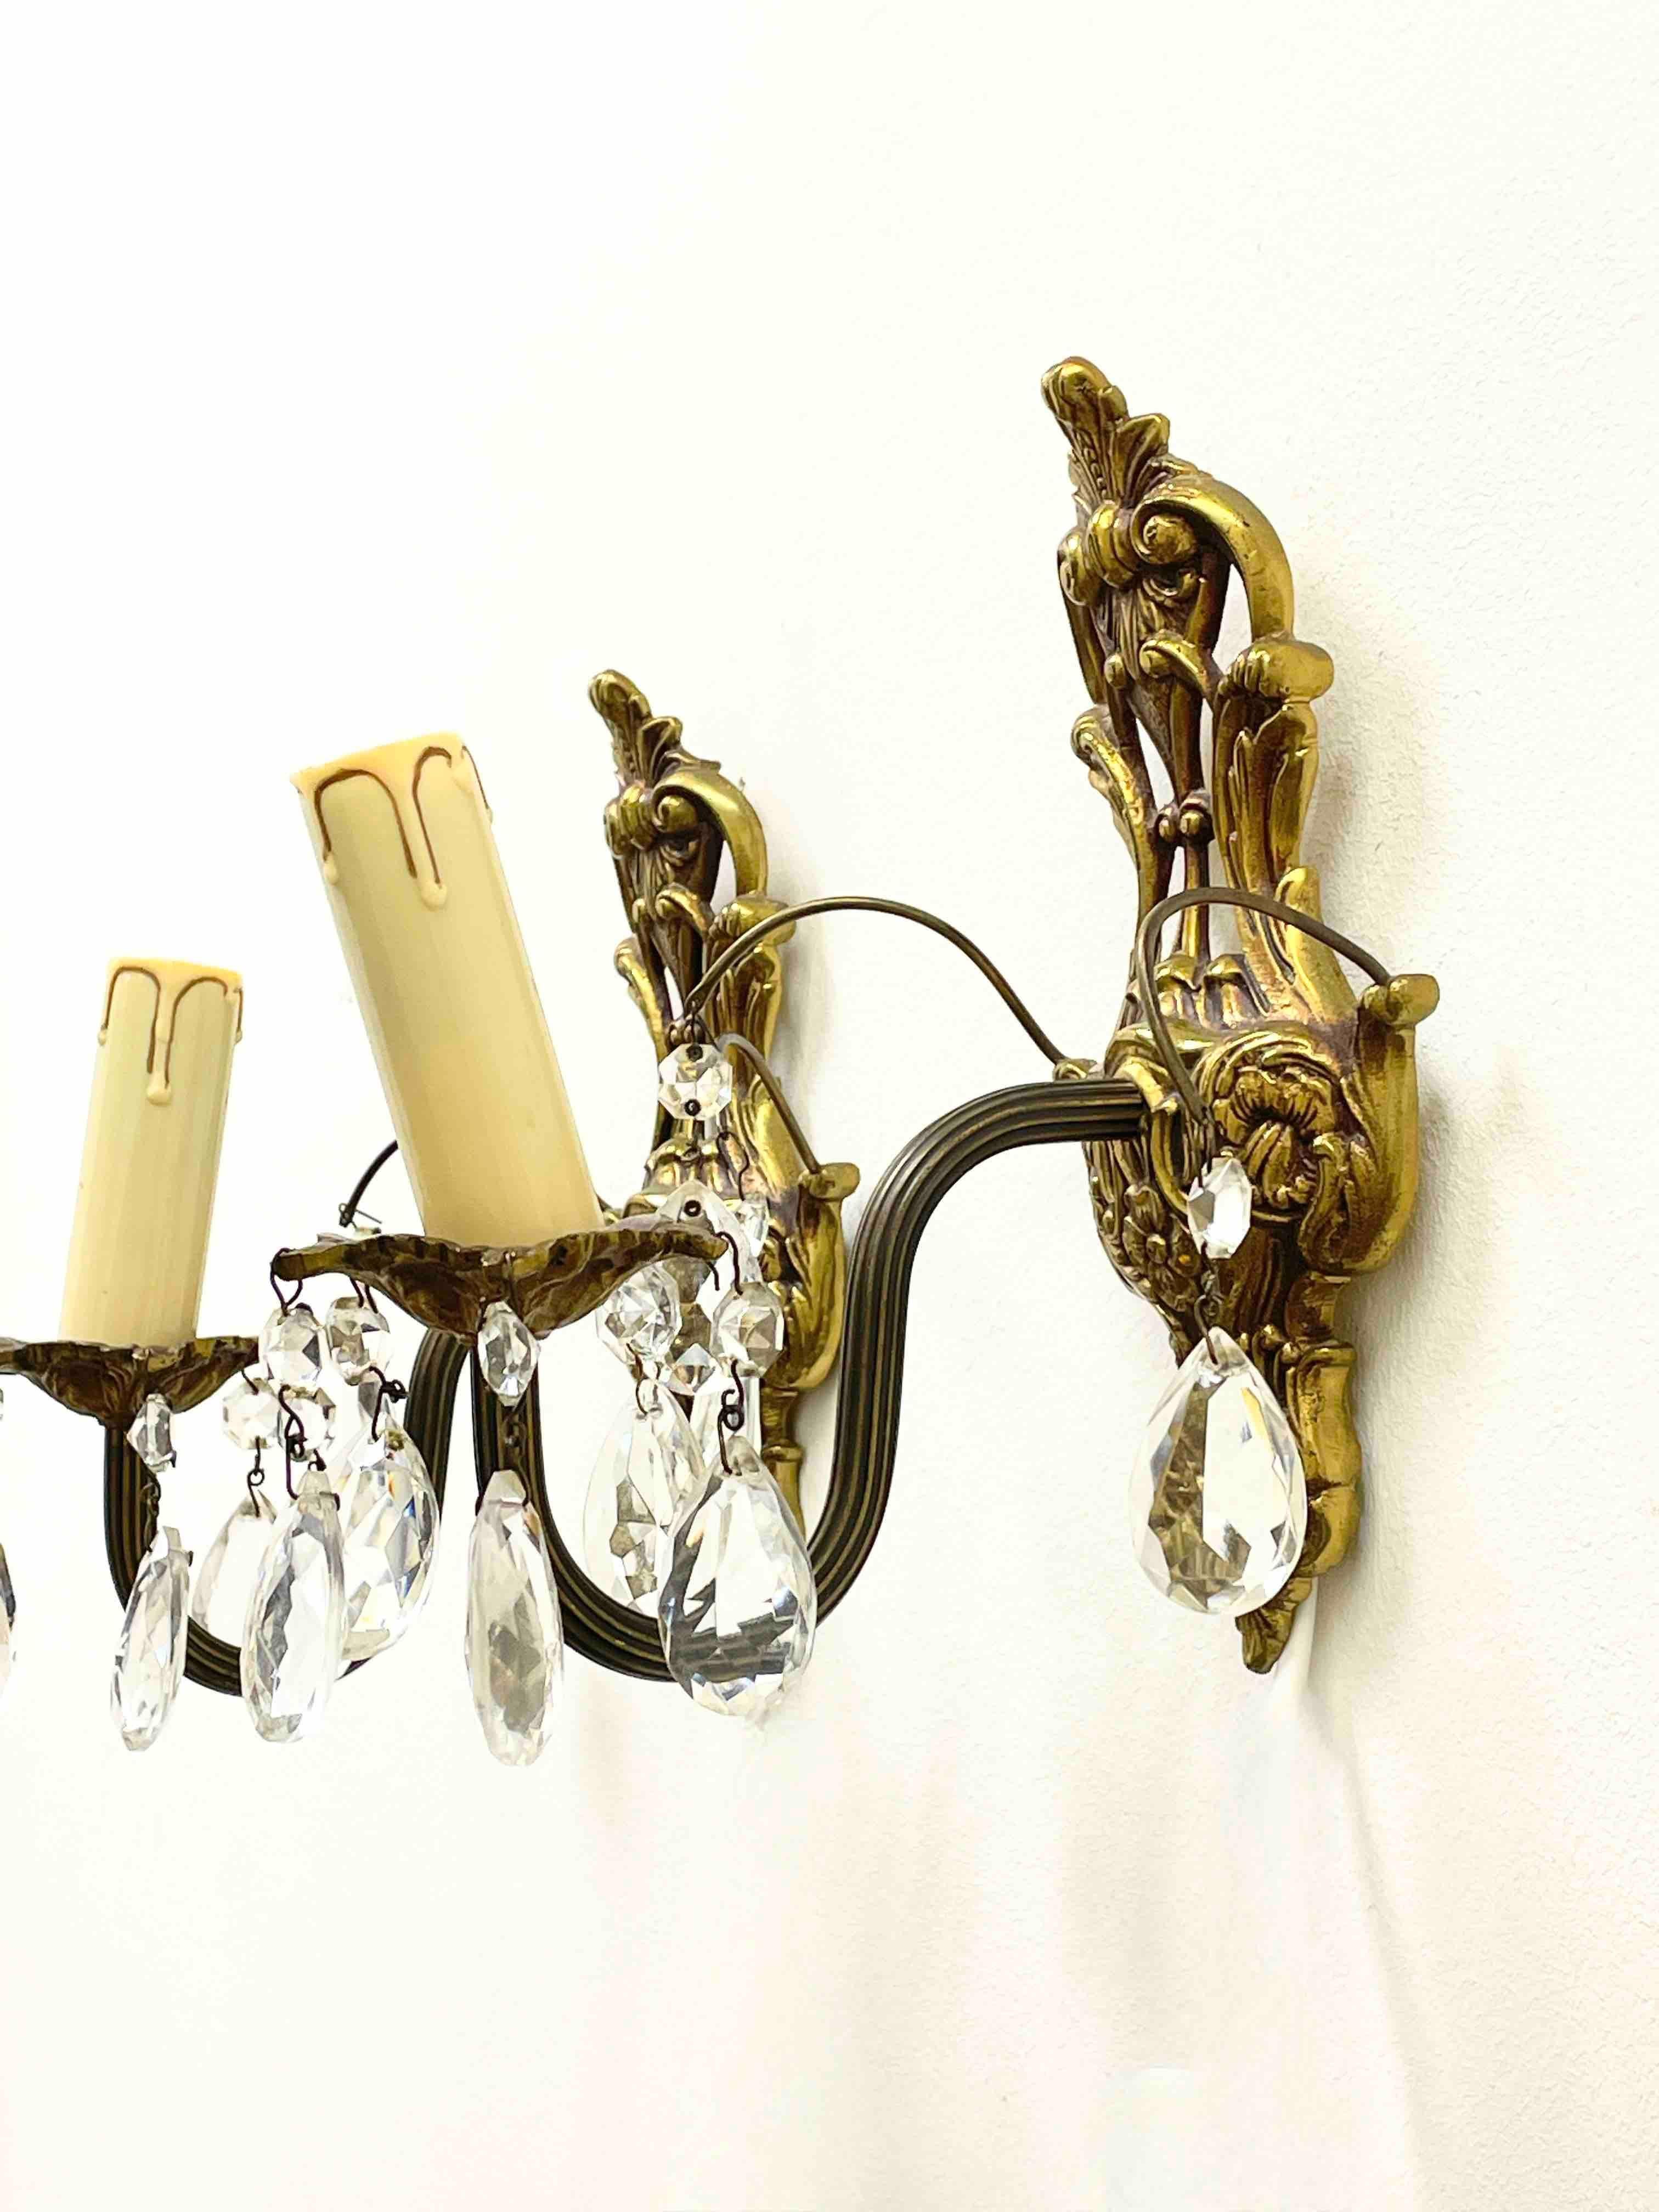 Hollywood Regency Pair of Sconces Bronze and Crystal Glass, Sweden, 1950s For Sale